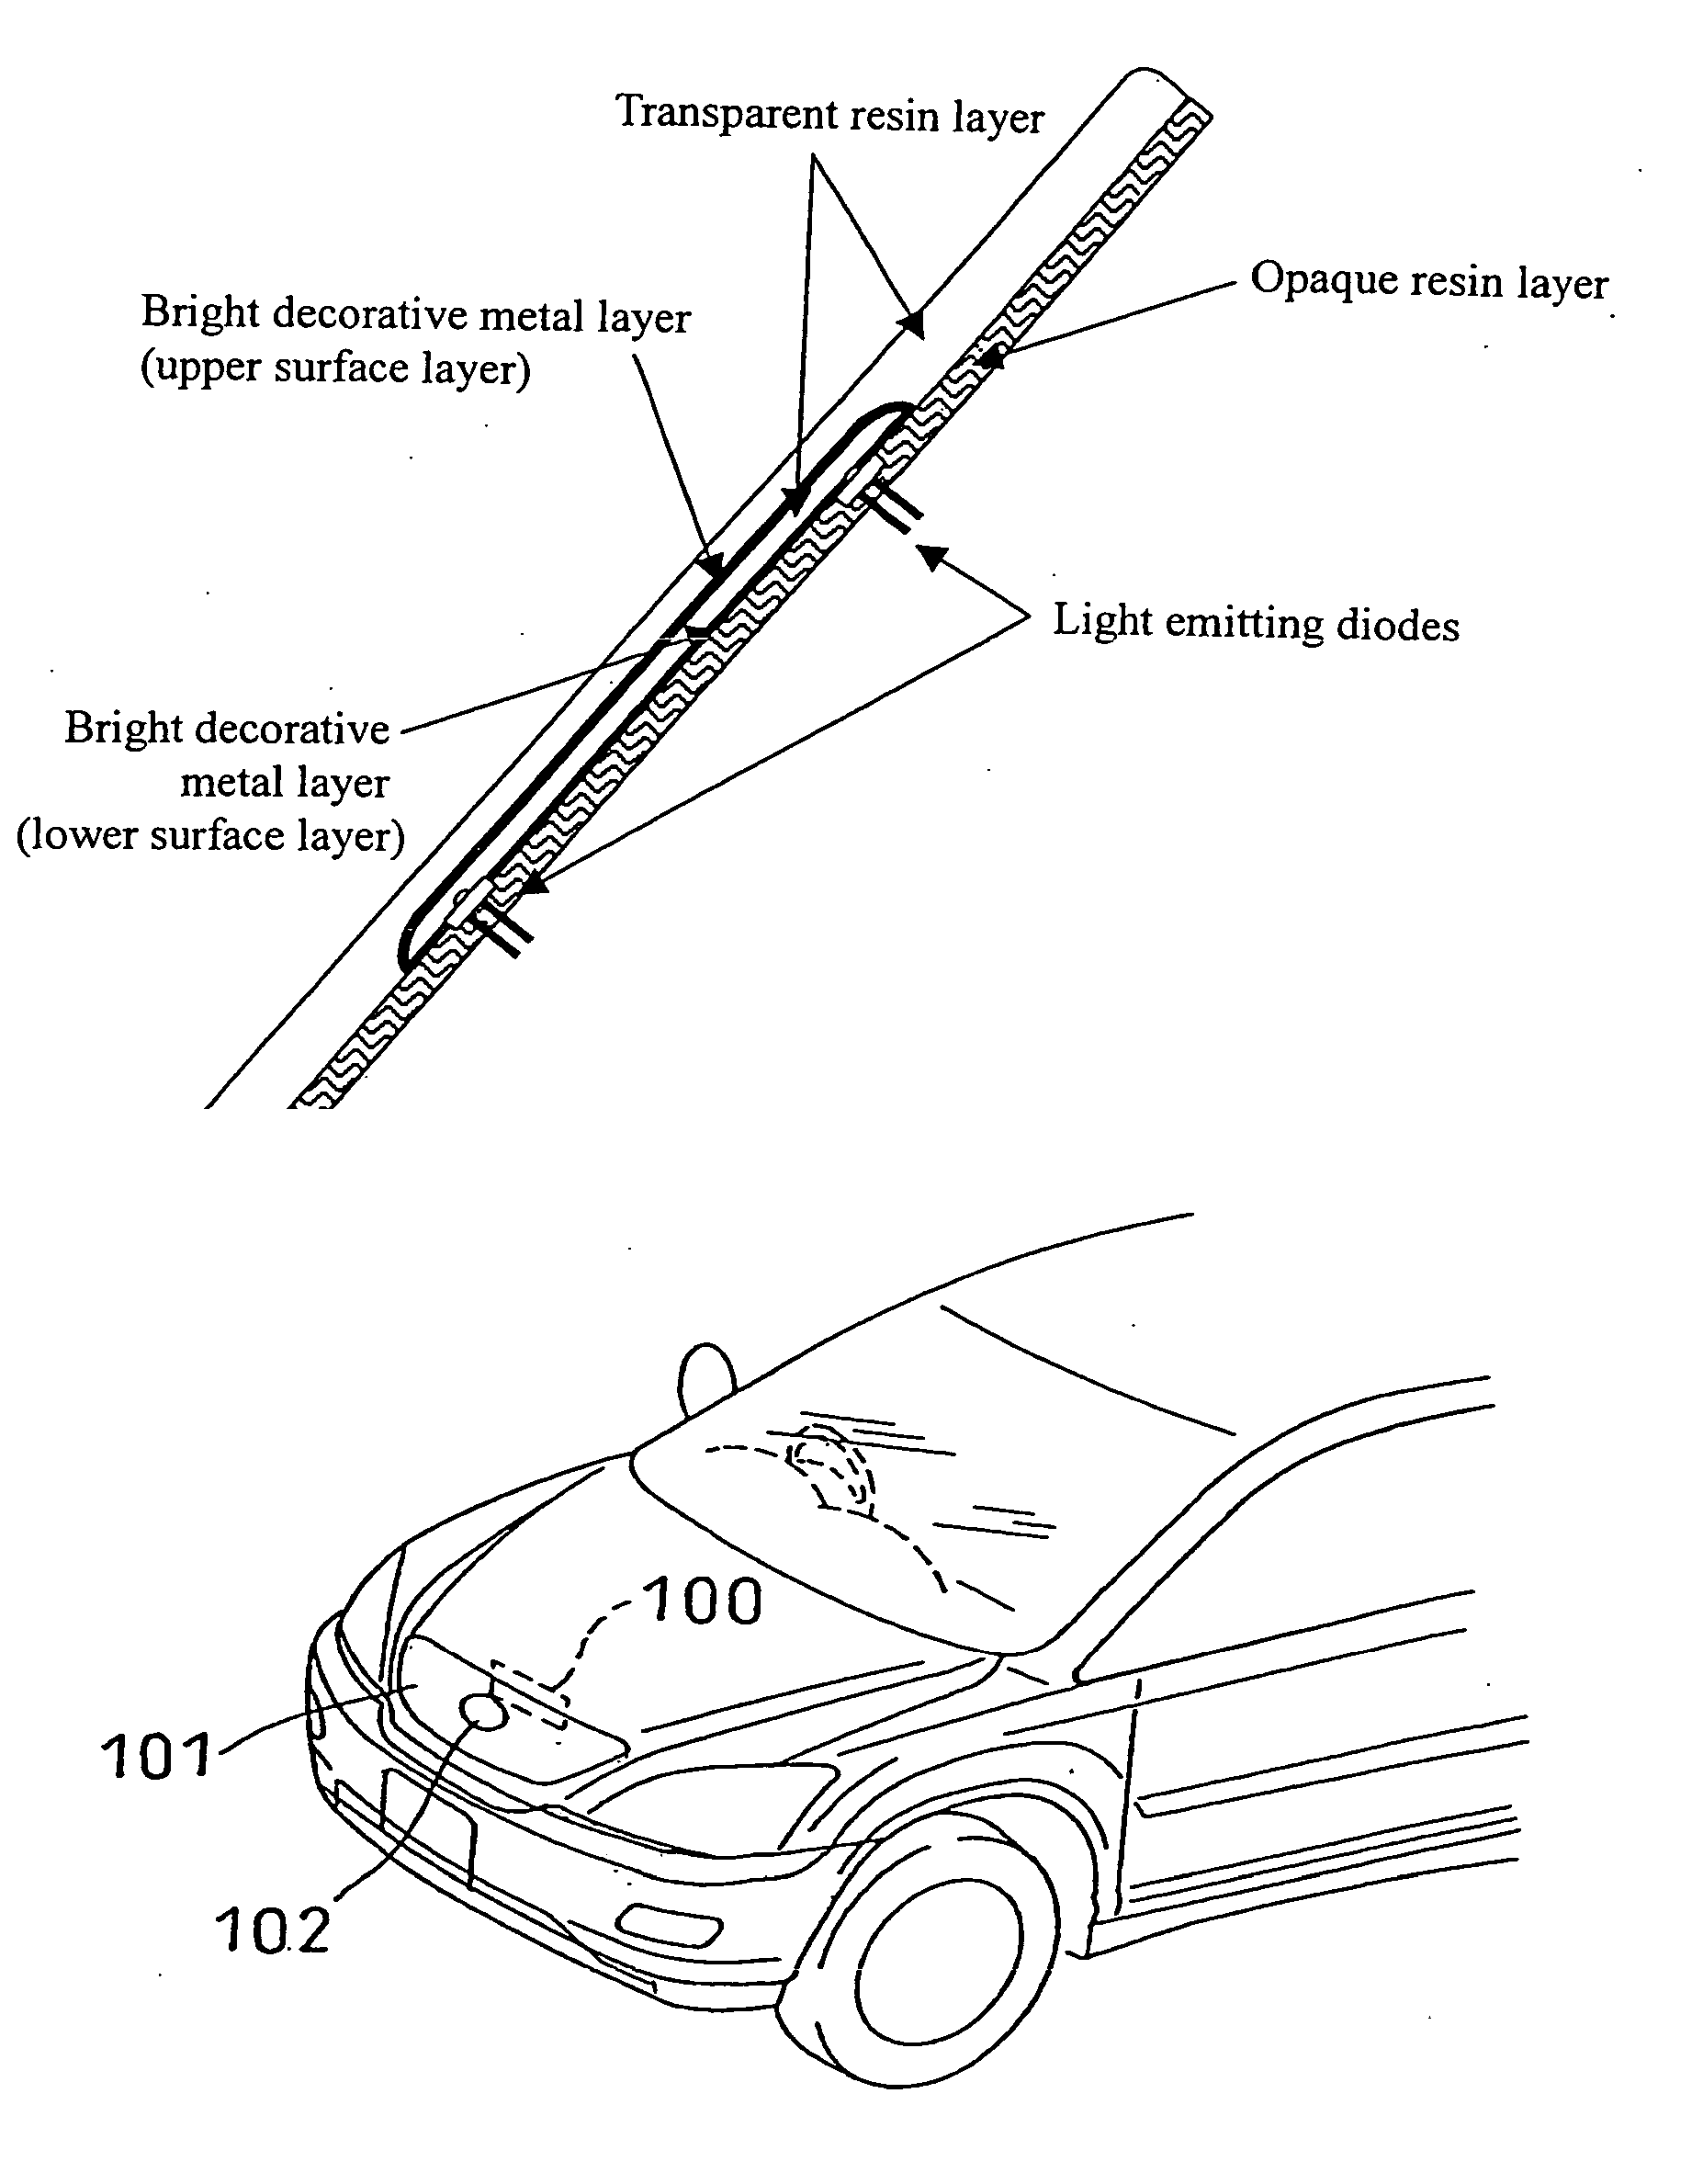 Bright decorative molded articles and molded articles located in the beam path of radar device